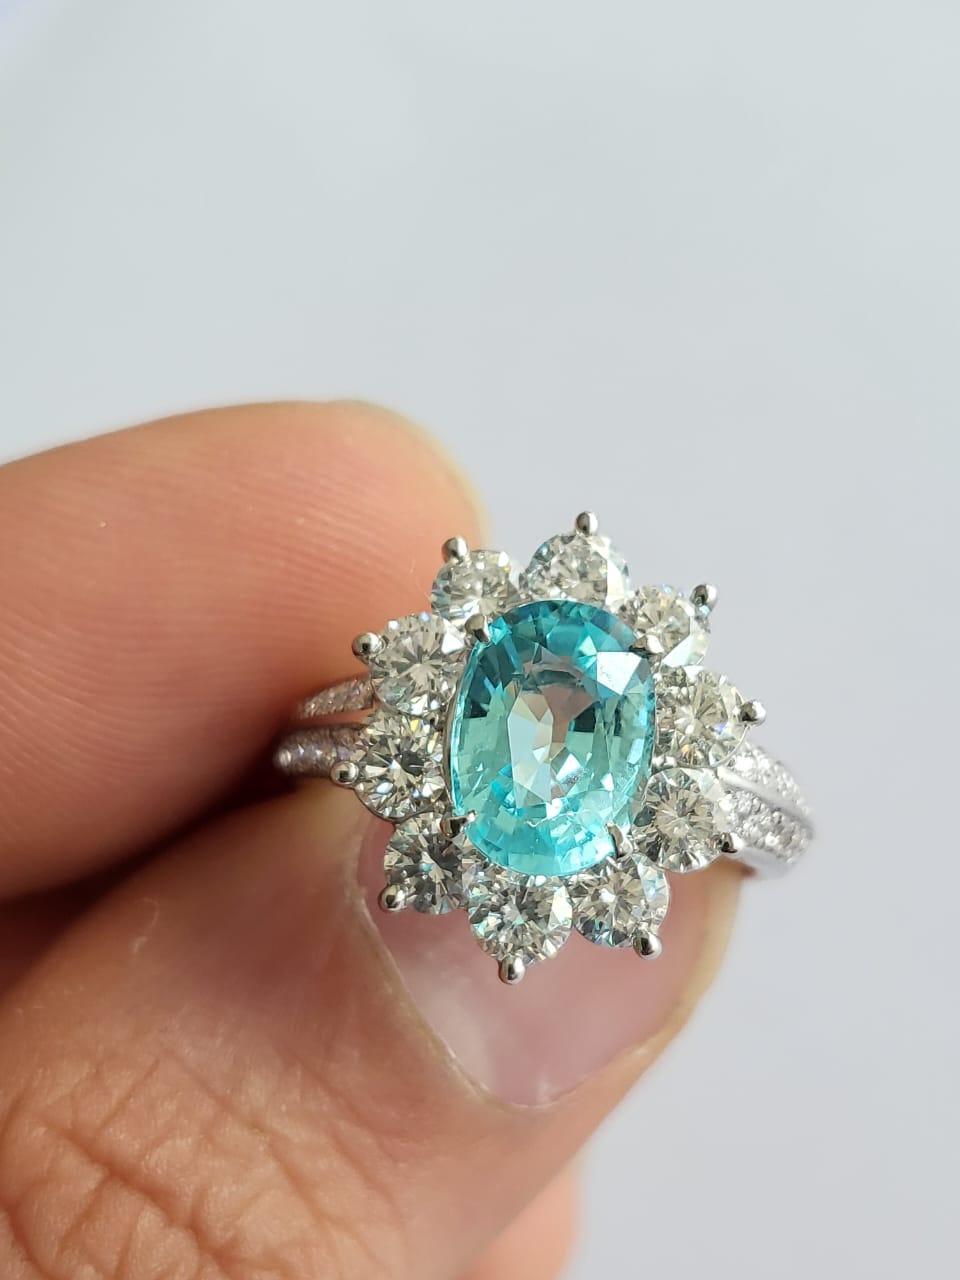 A very gorgeous and stunning, Paraiba Tourmaline Engagement Cocktail Ring set in Platinum 900 & Diamonds. The weight of the Paraiba Tourmaline is 1.83 carats. The Paraiba Tourmaline is completely natural, without any treatment and is of Mozambique